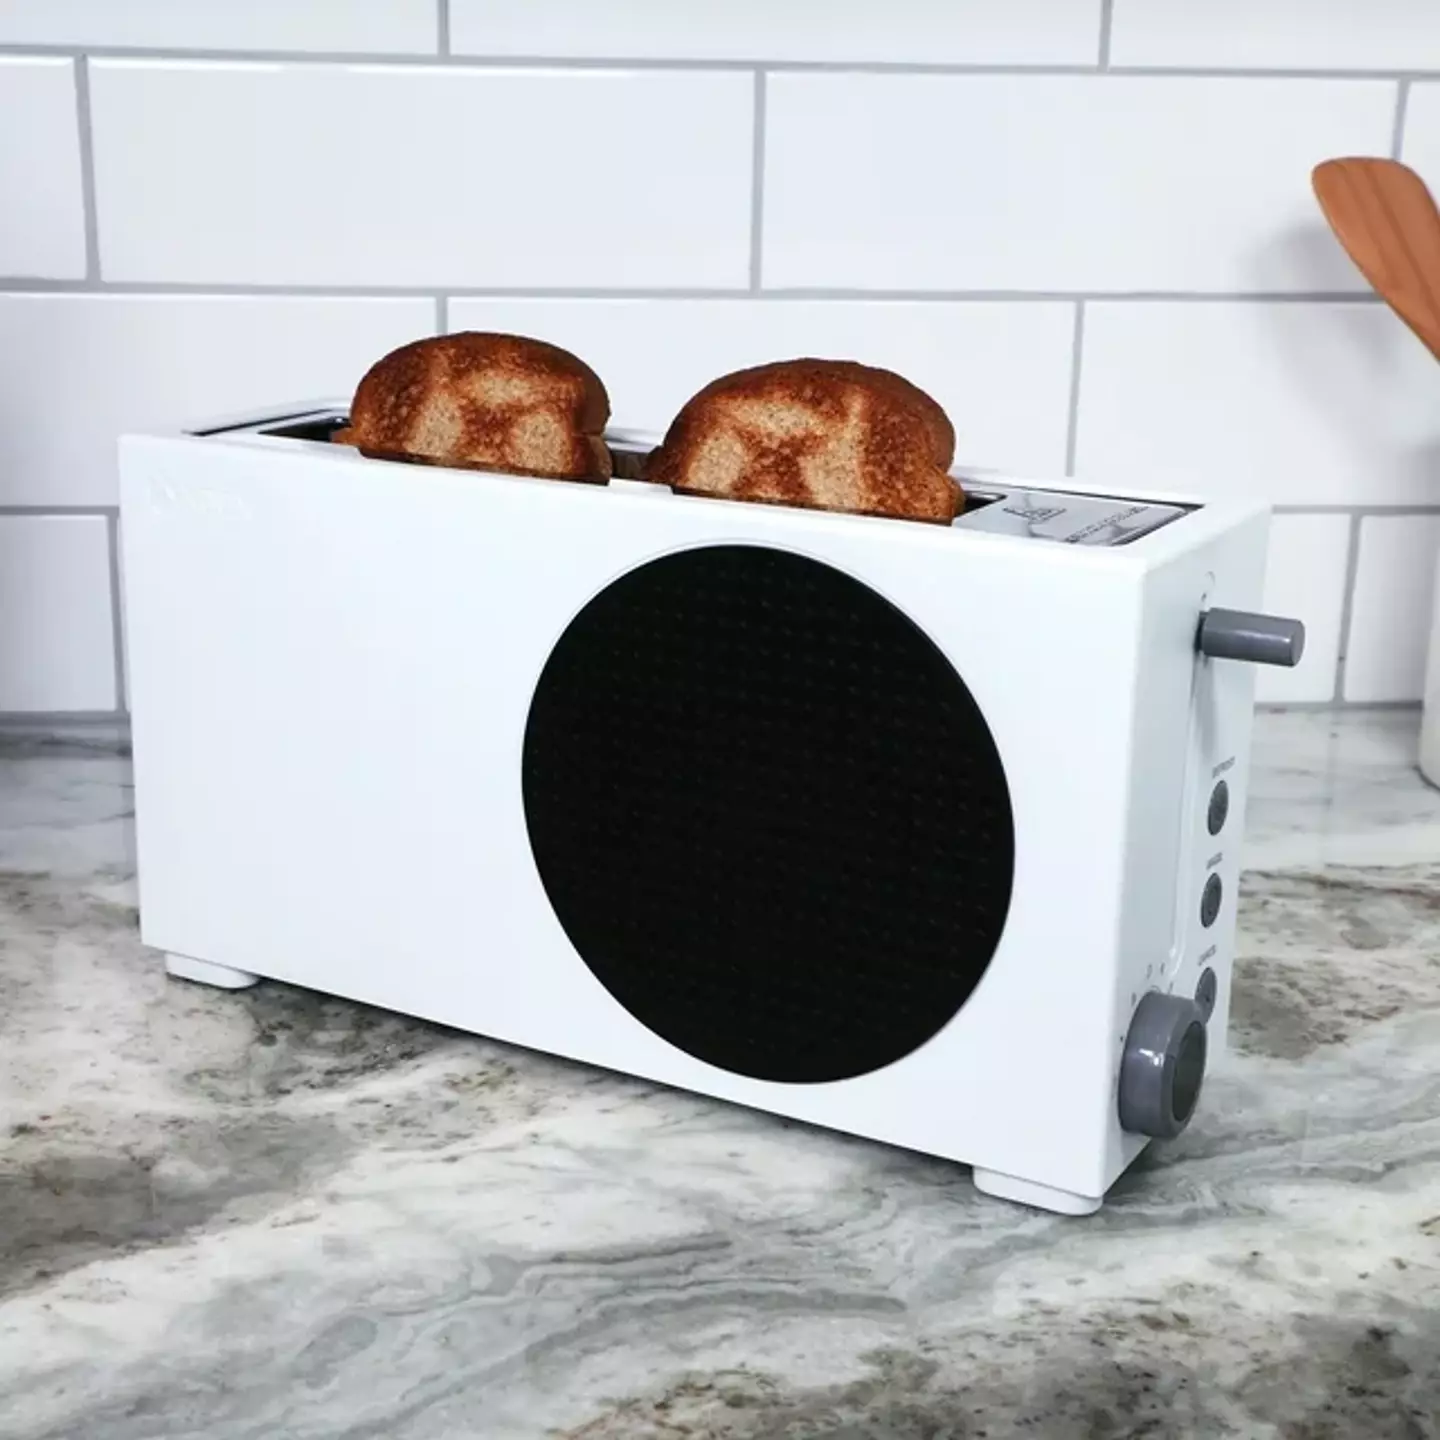 The toaster would sit nicely next to the Xbox-themed fridge.